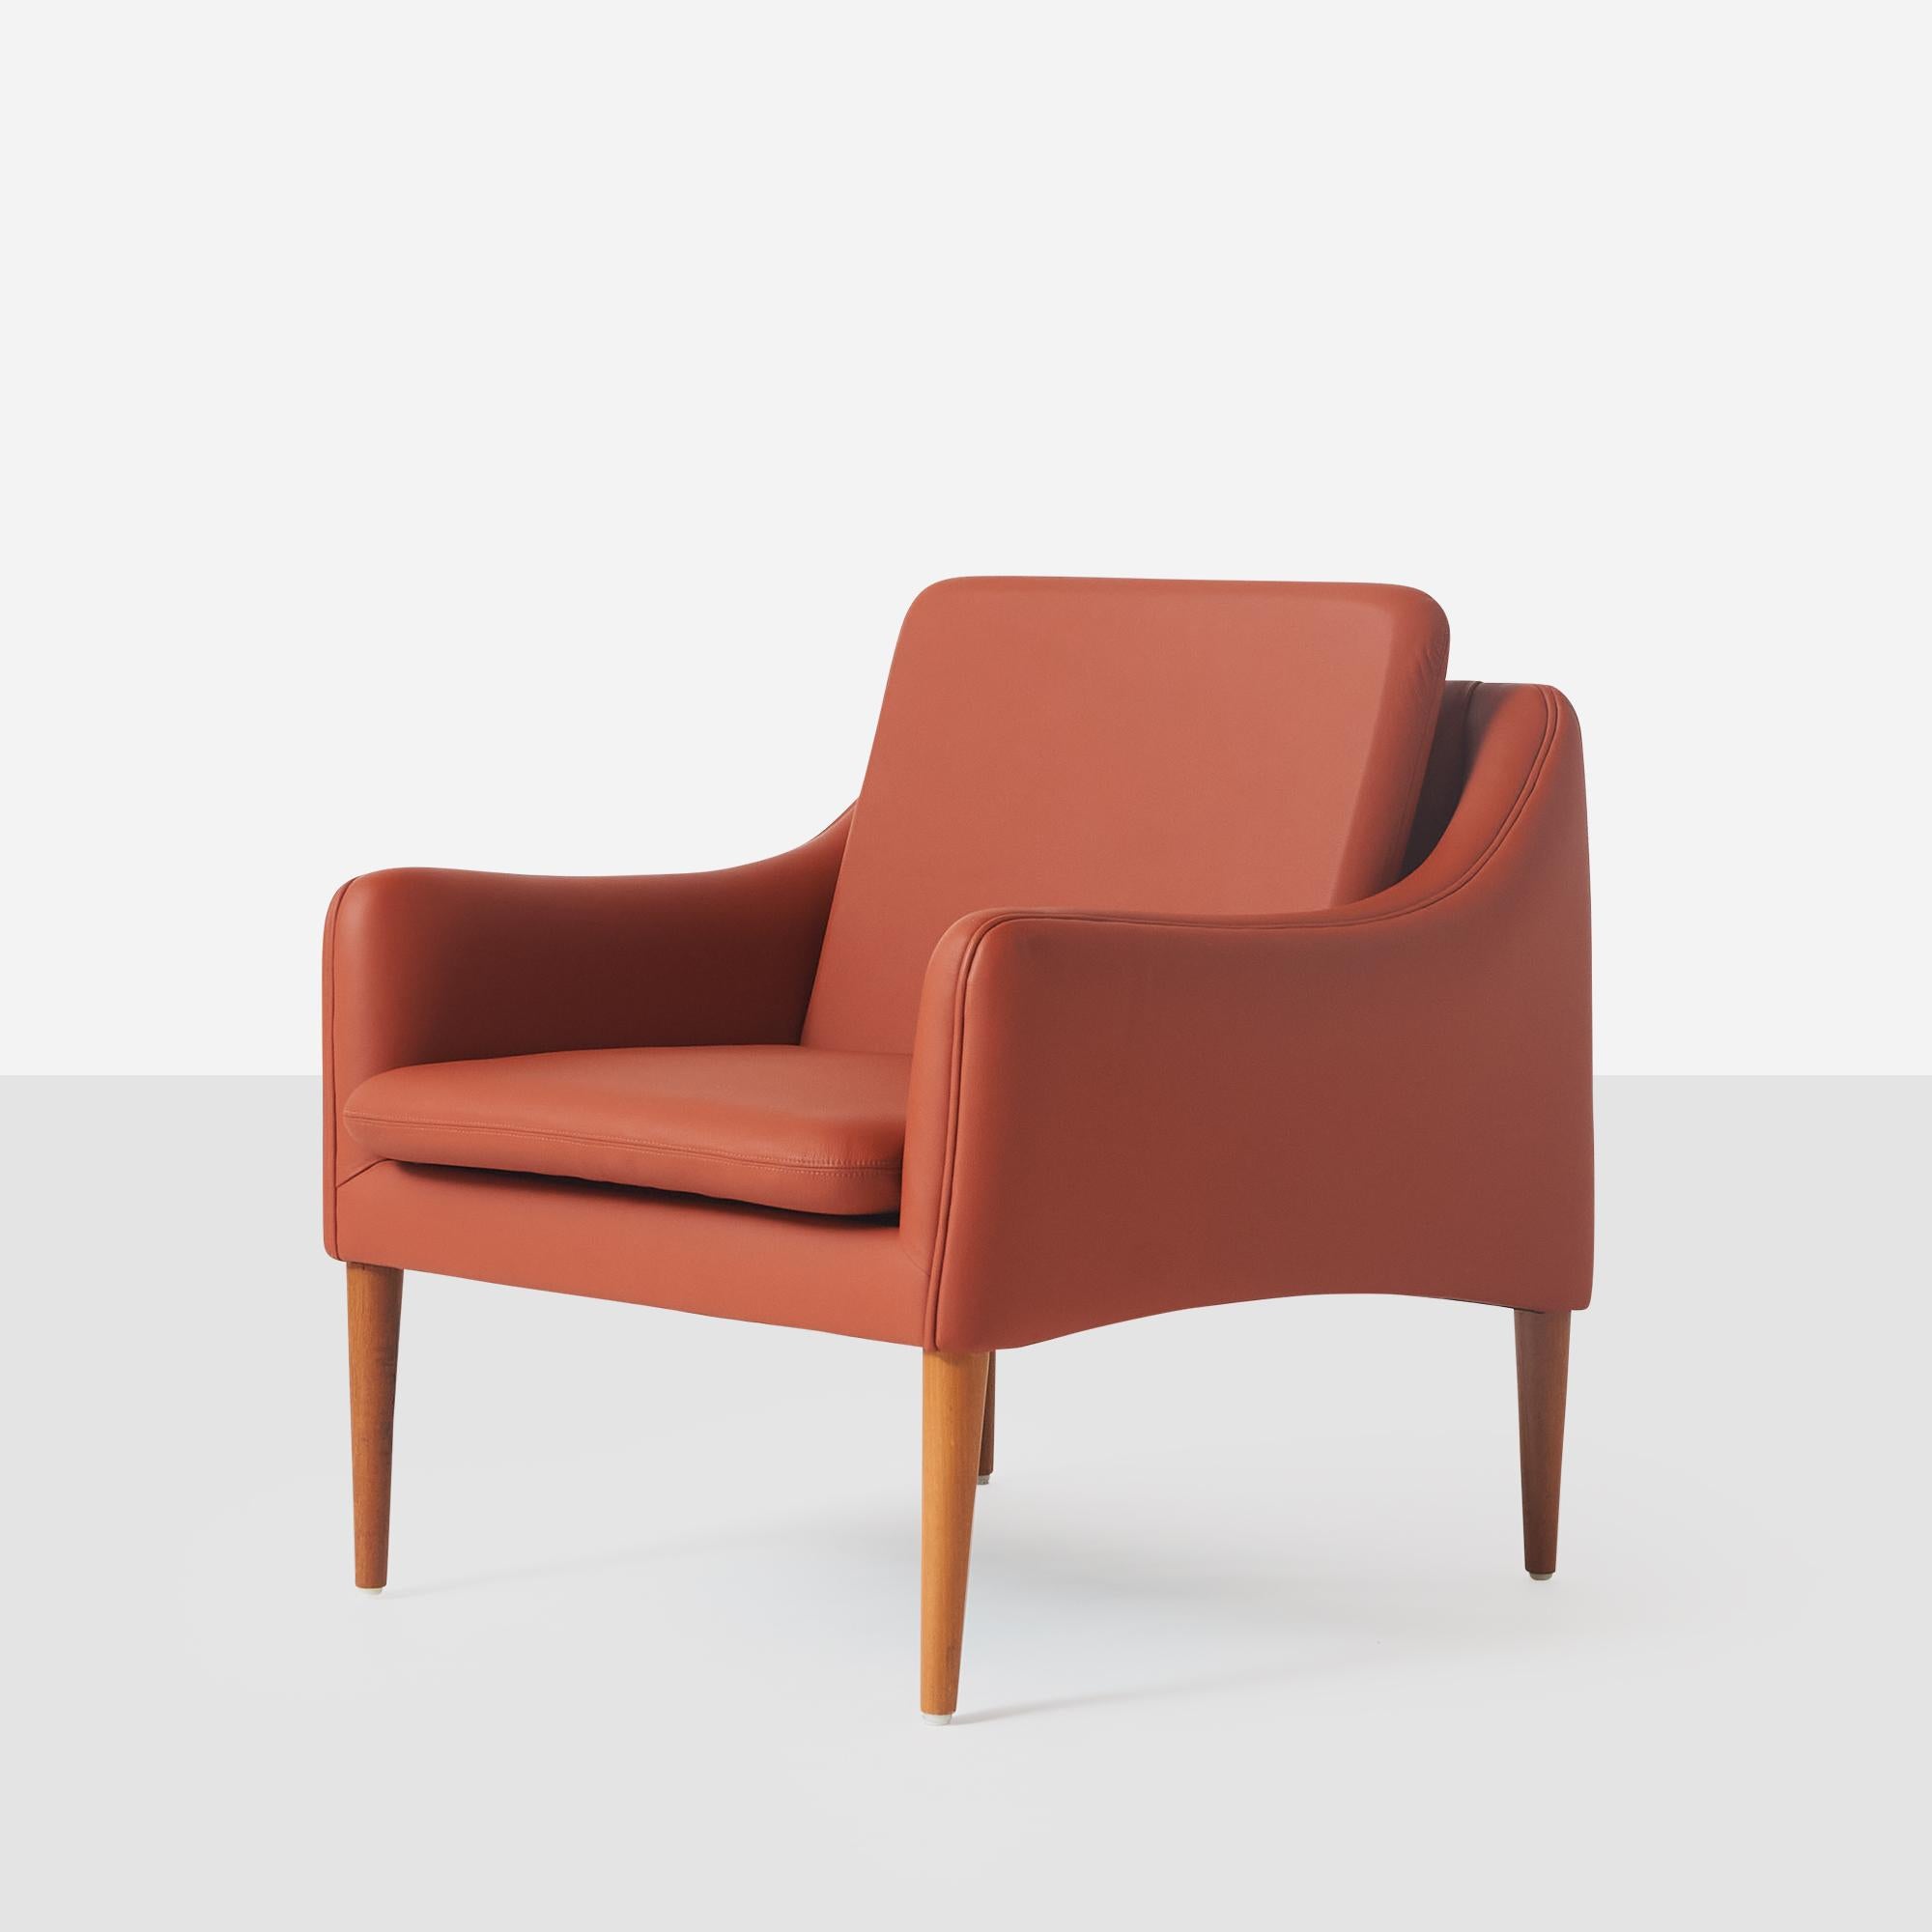 A series 800 club chair by Hans Olsen. The chair has been recovered in a persimmon colored leather.